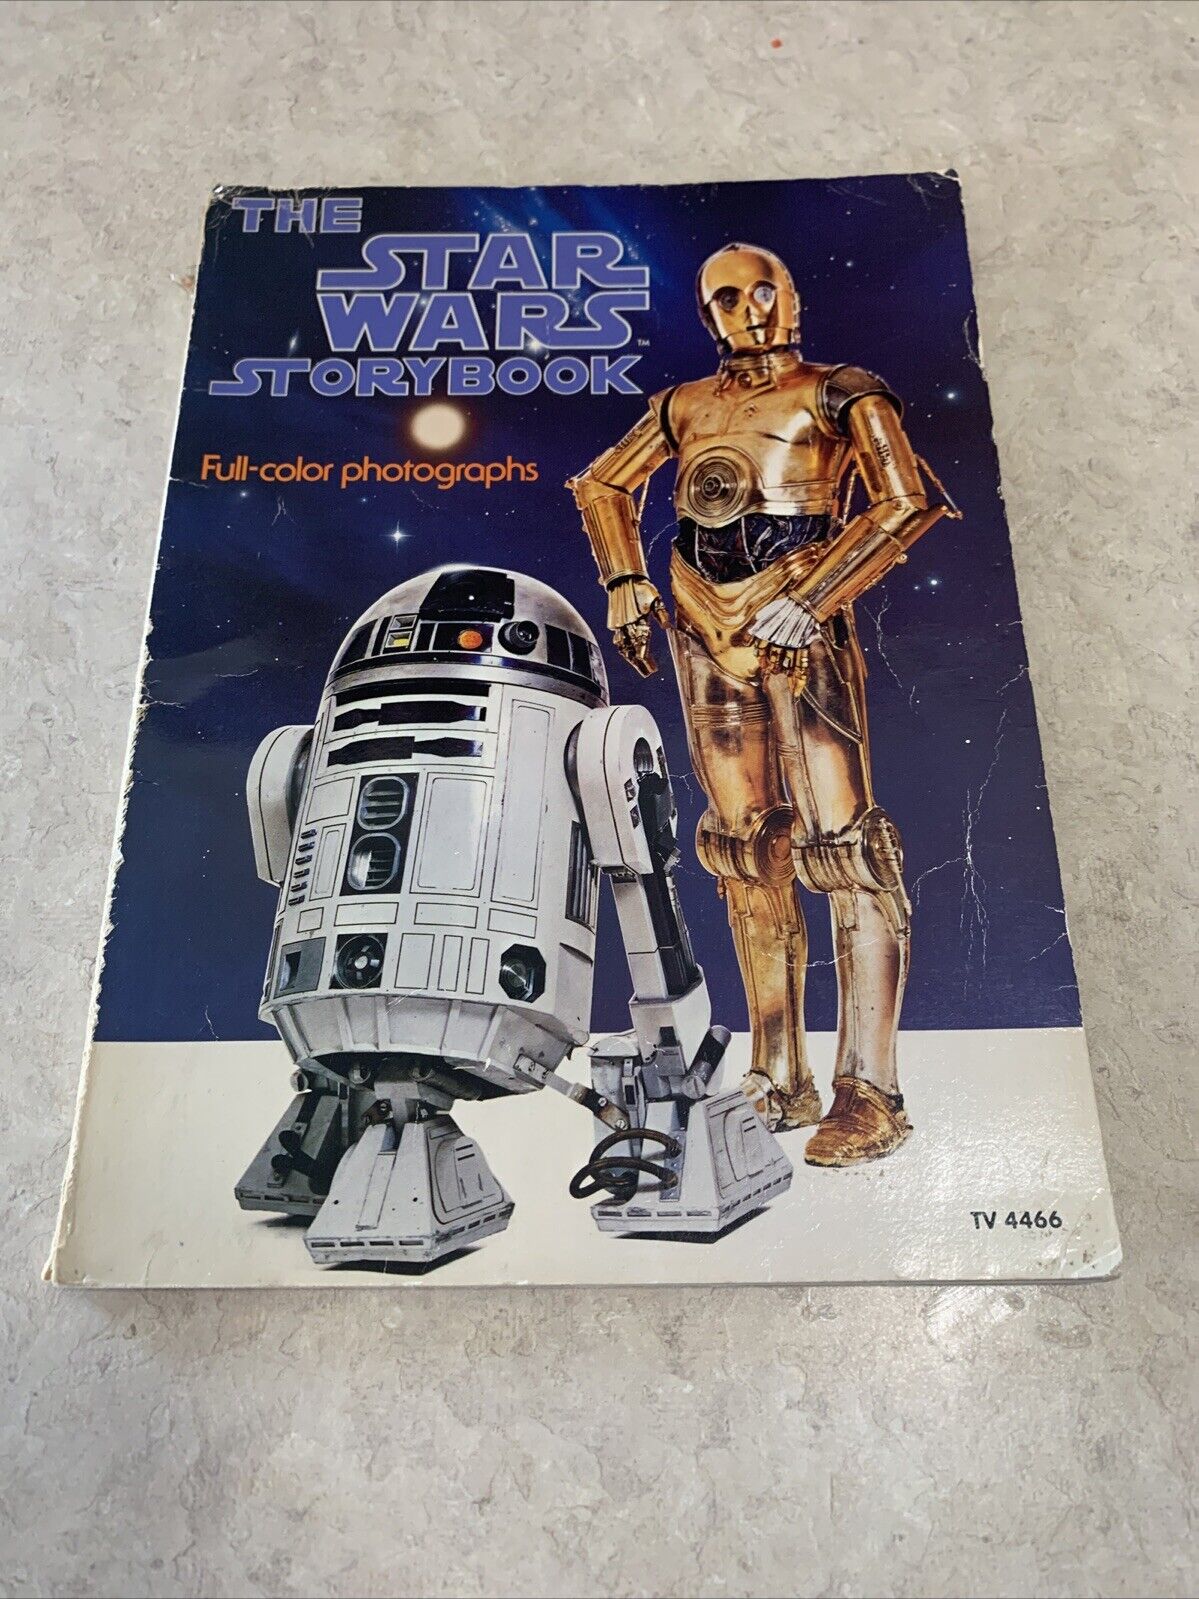 1978 The Star Wars Storybook Full-color Photographs Scholastic Book